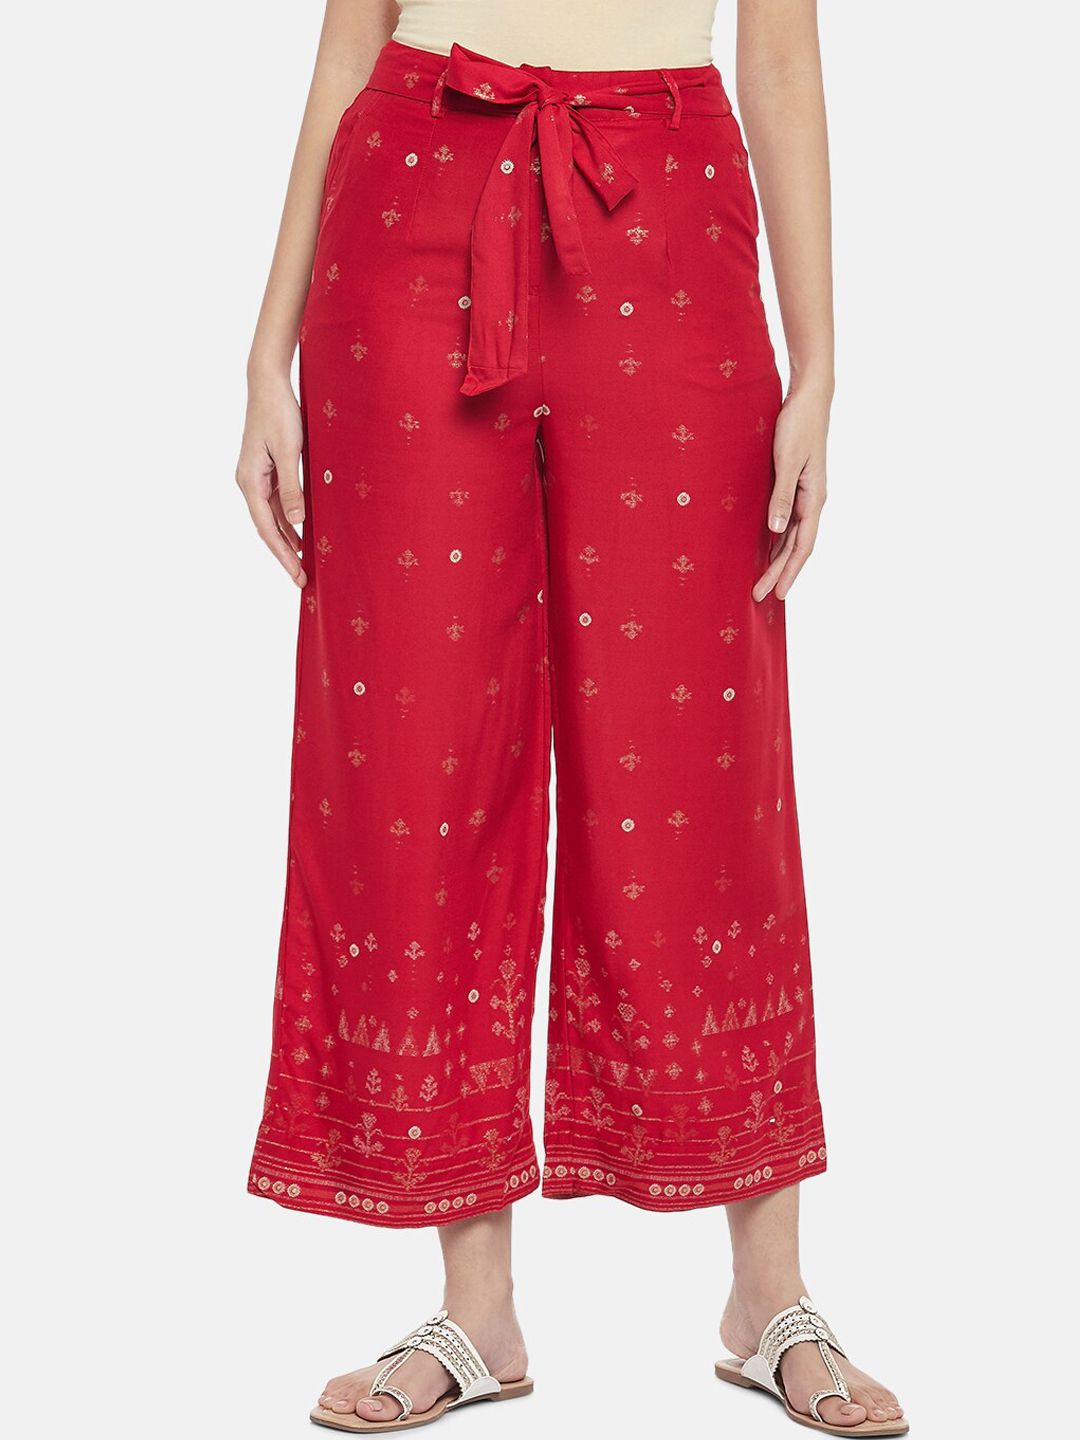 AKKRITI BY PANTALOONS Women Red Ethnic Motifs Printed Parallel Trousers Price in India